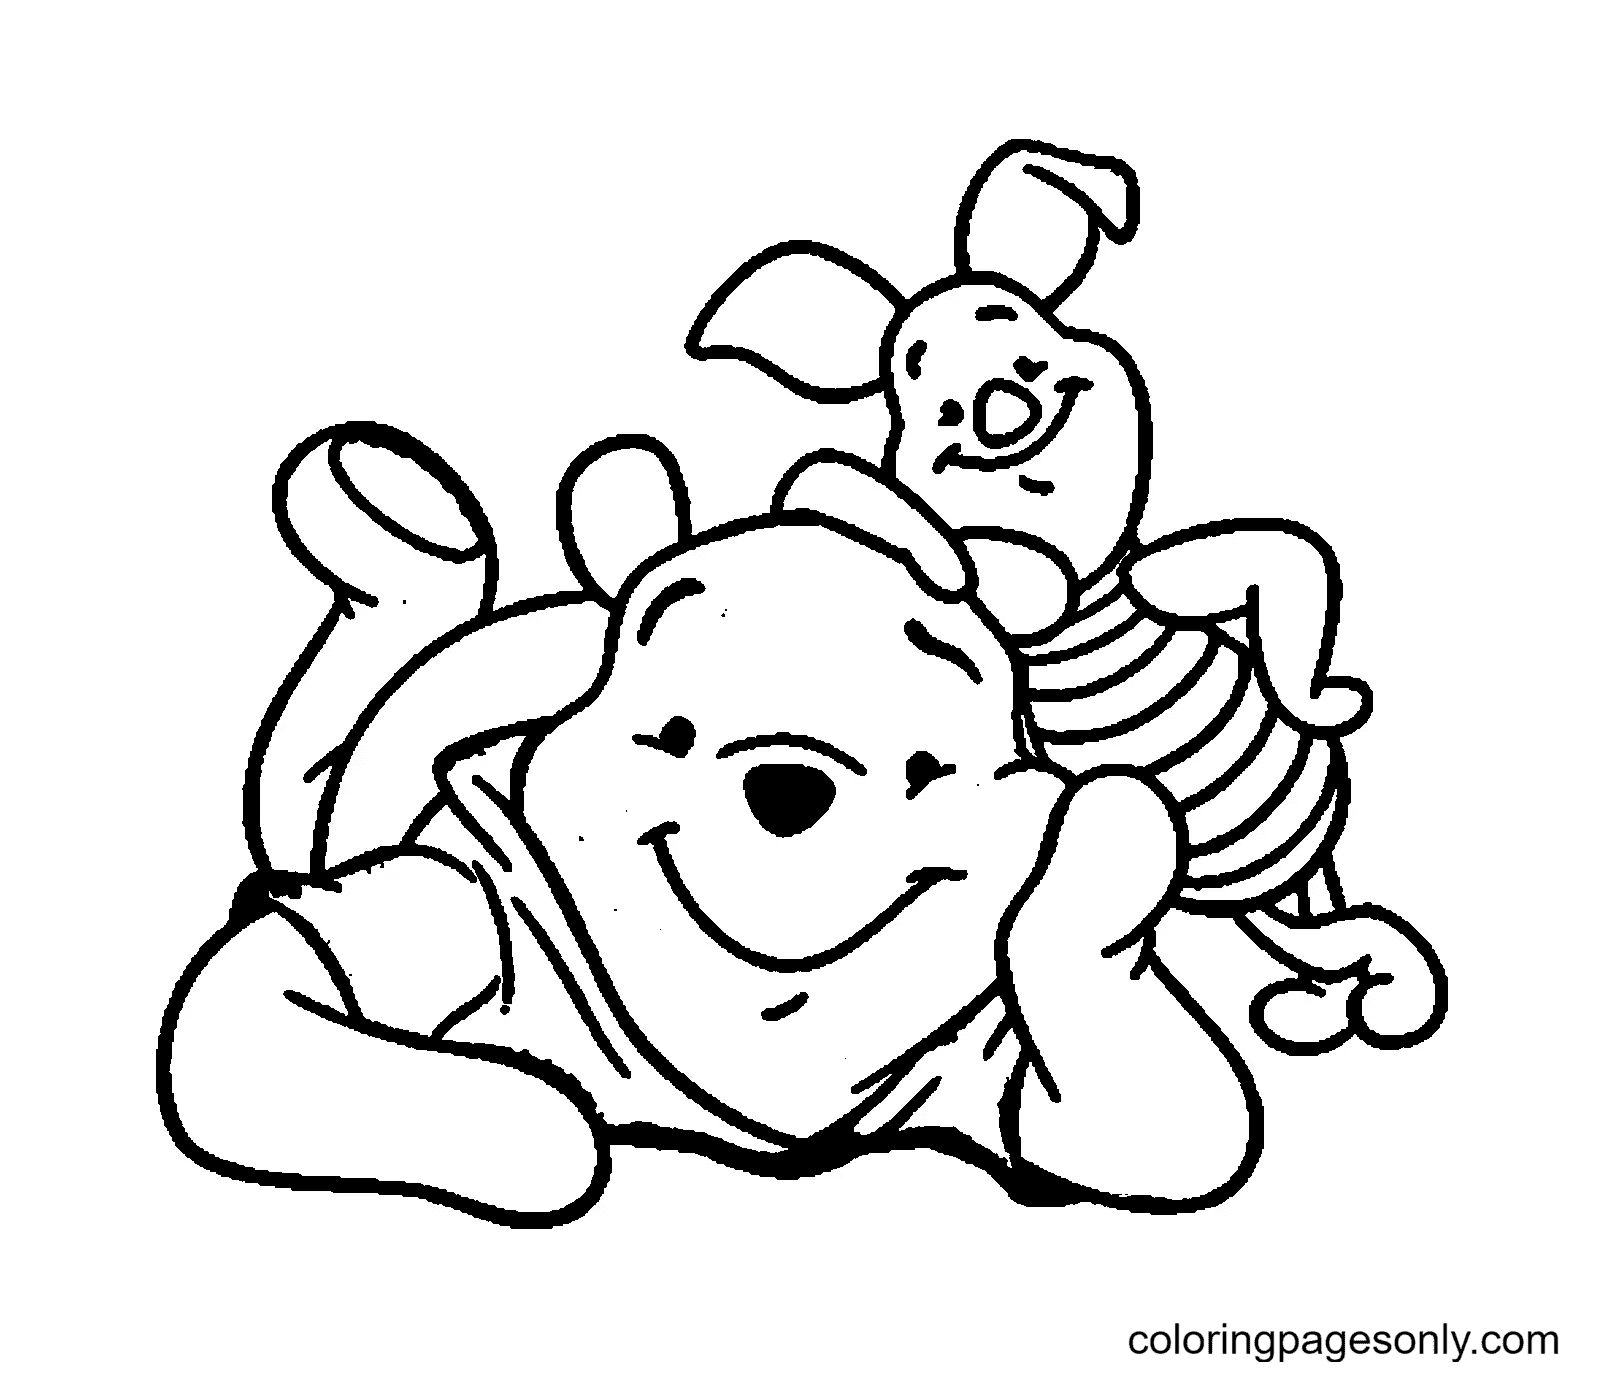 Piglet with Pooh Coloring Page